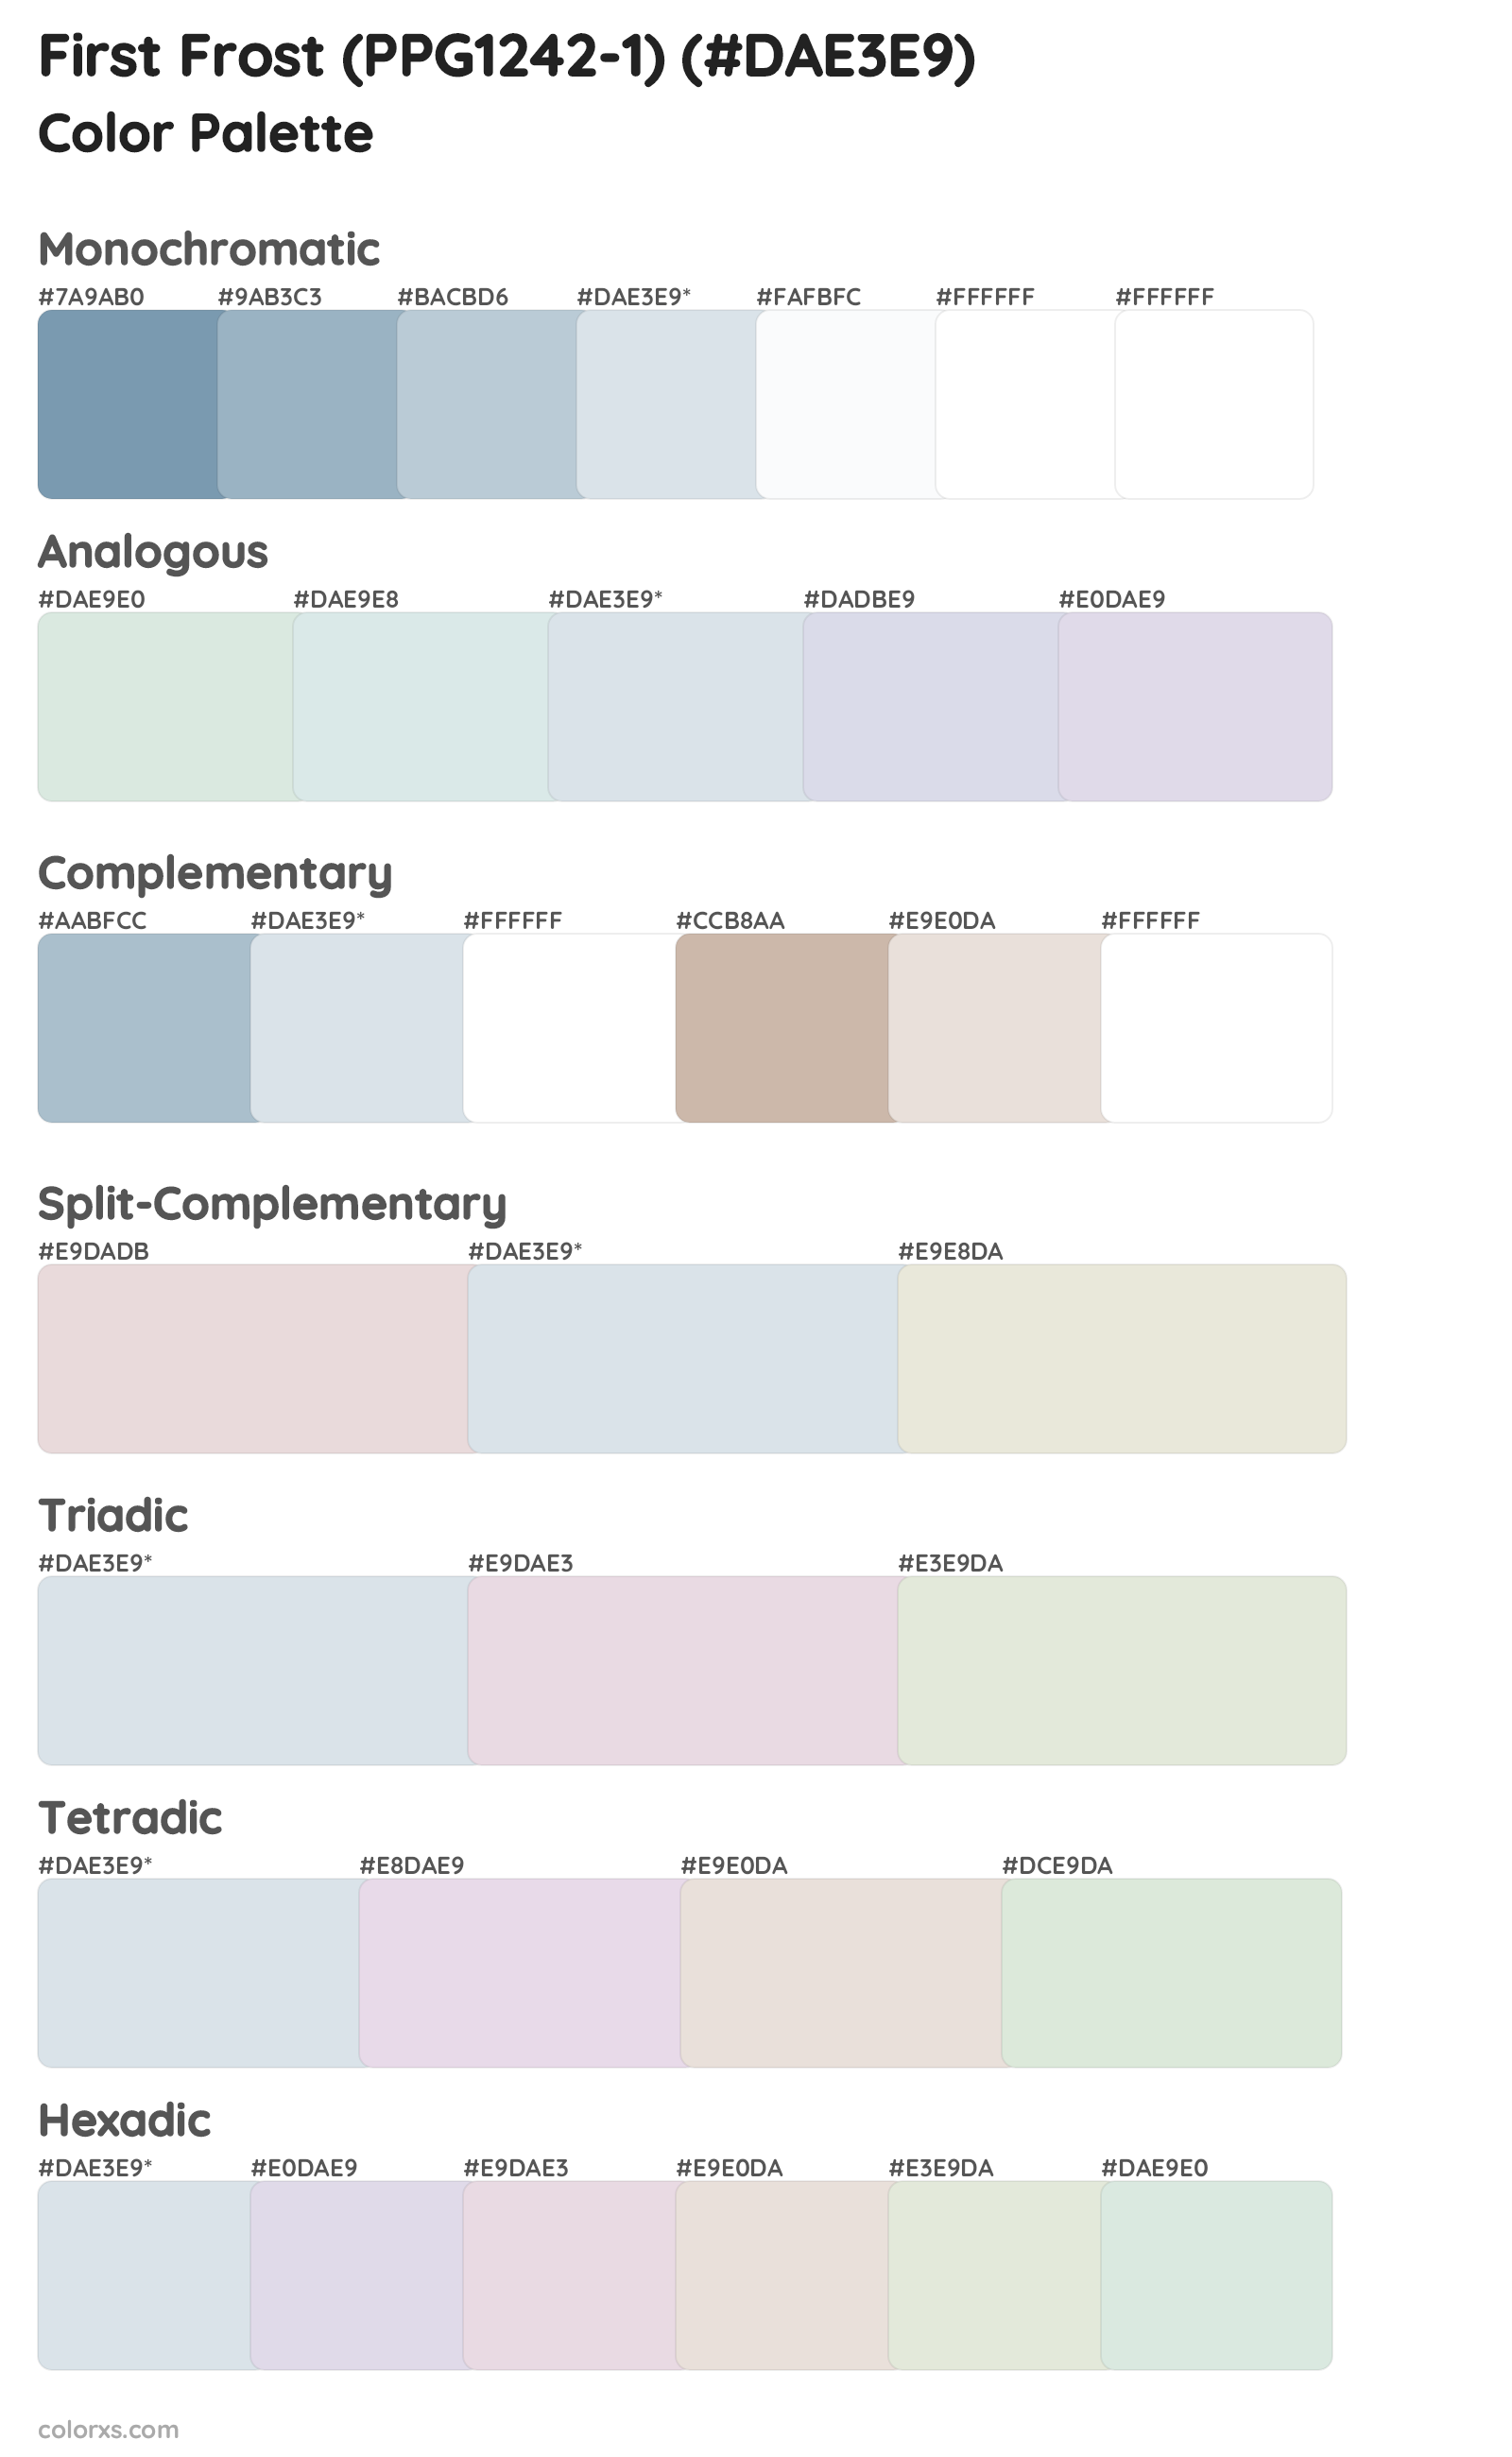 First Frost (PPG1242-1) Color Scheme Palettes